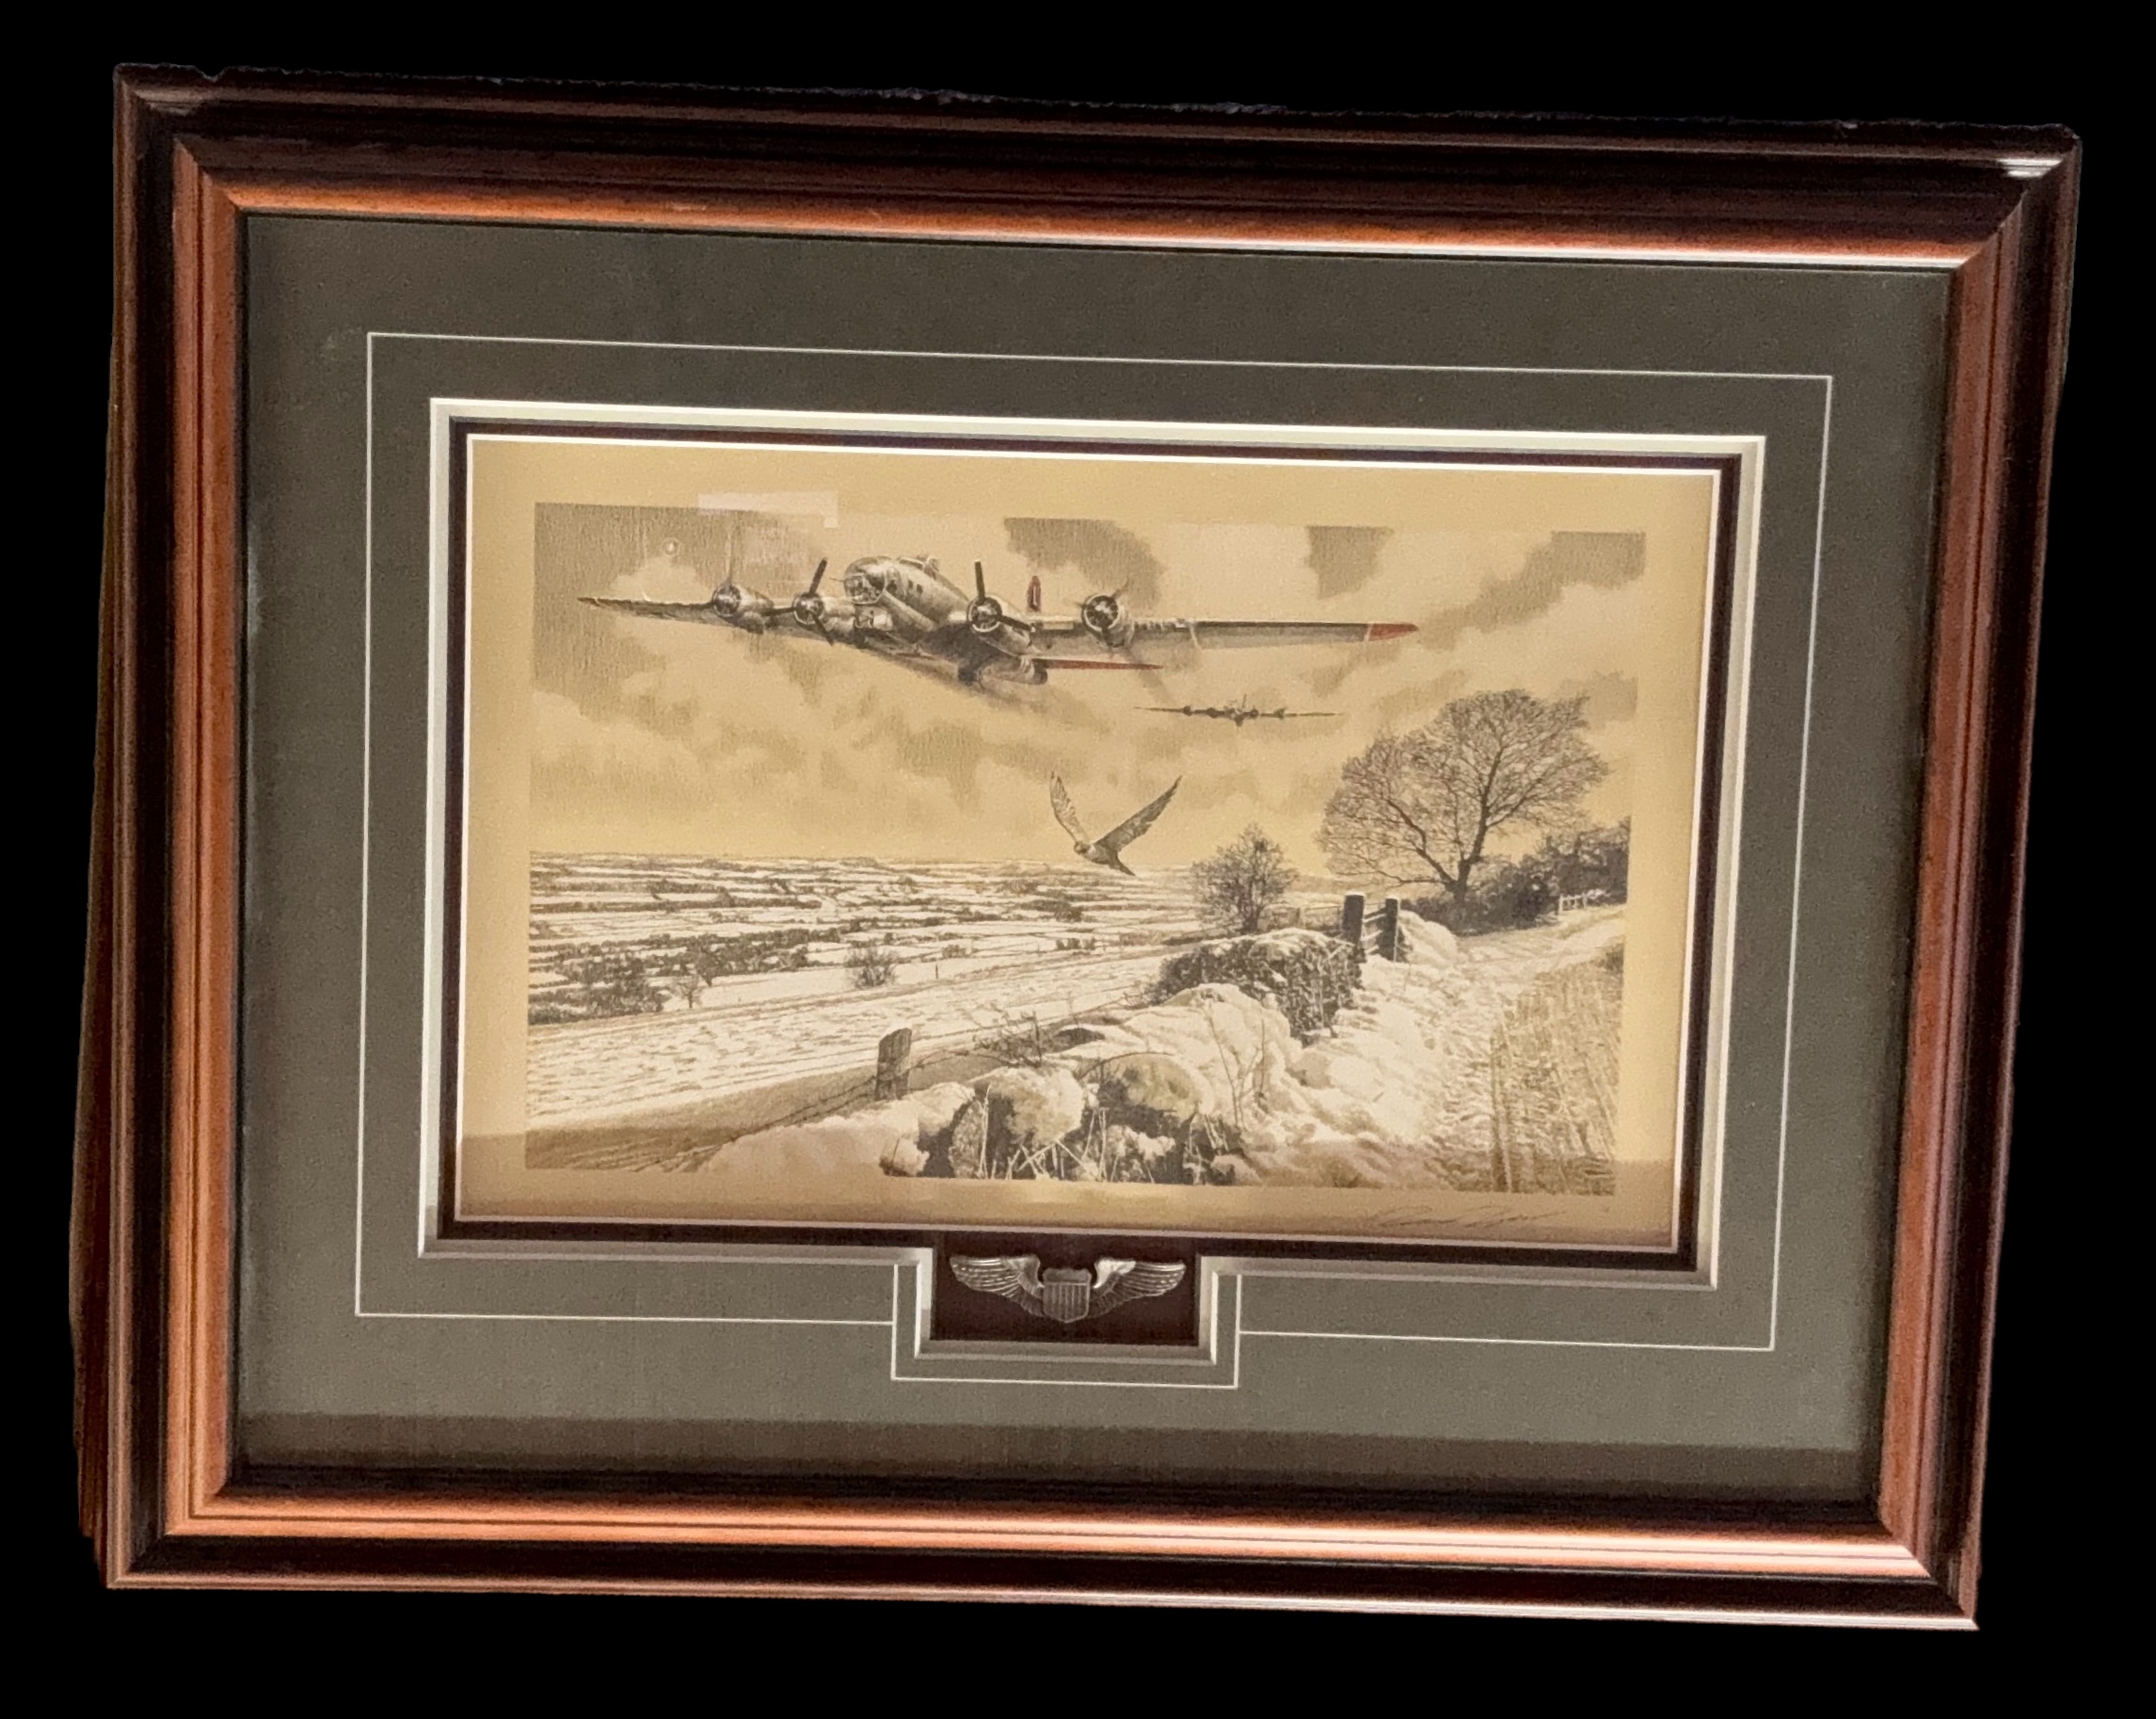 WW2 Print by artist Robert Taylor Limited. Picturing WW2 plane flying over a field, USAF wings - Image 2 of 3